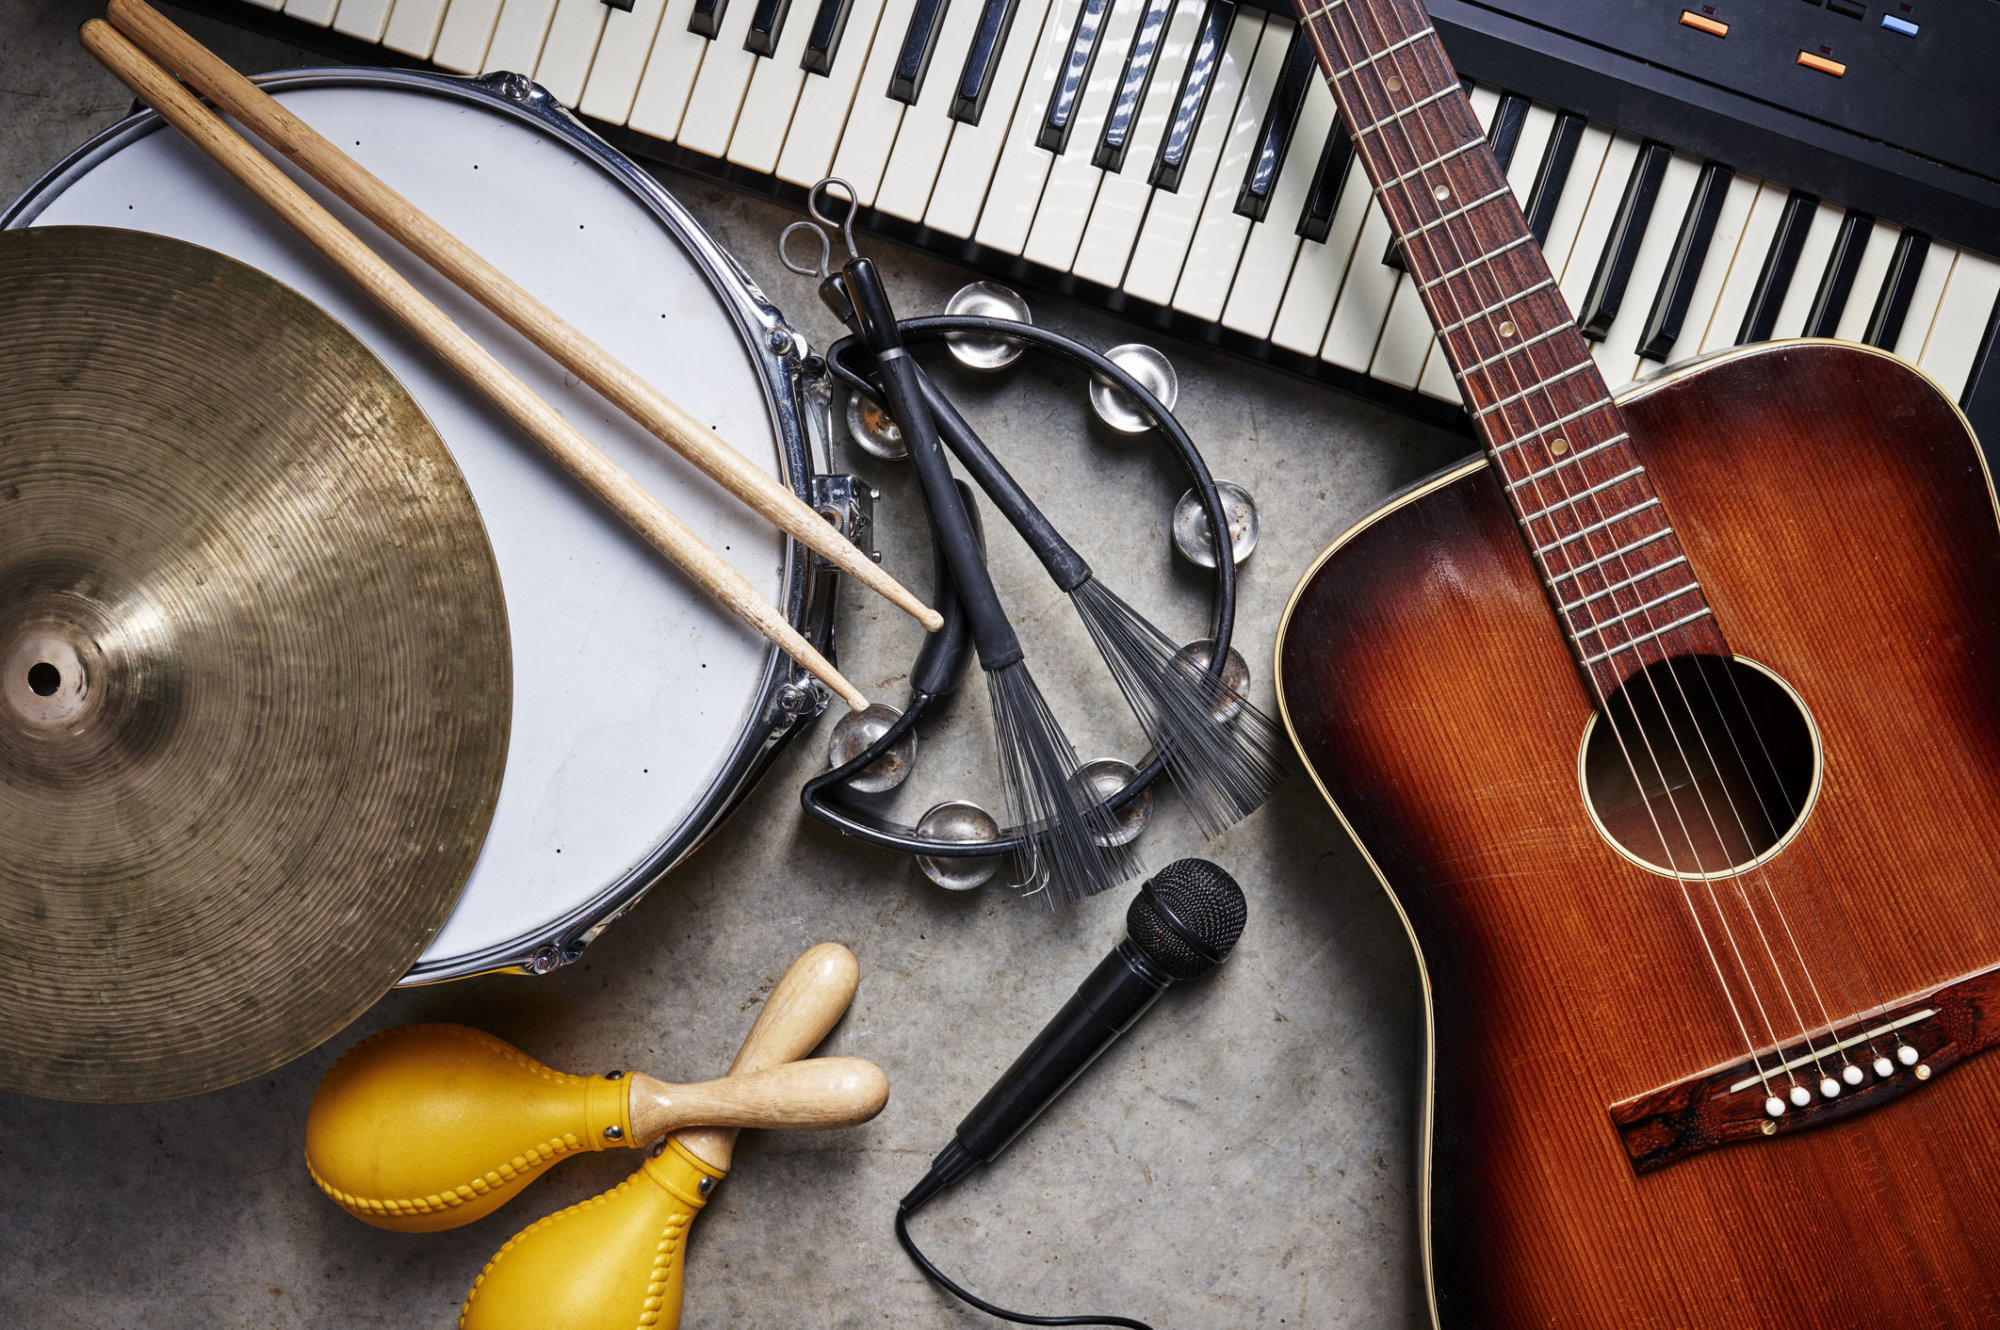 Musical instruments available for checkout at Montgomery Co. library